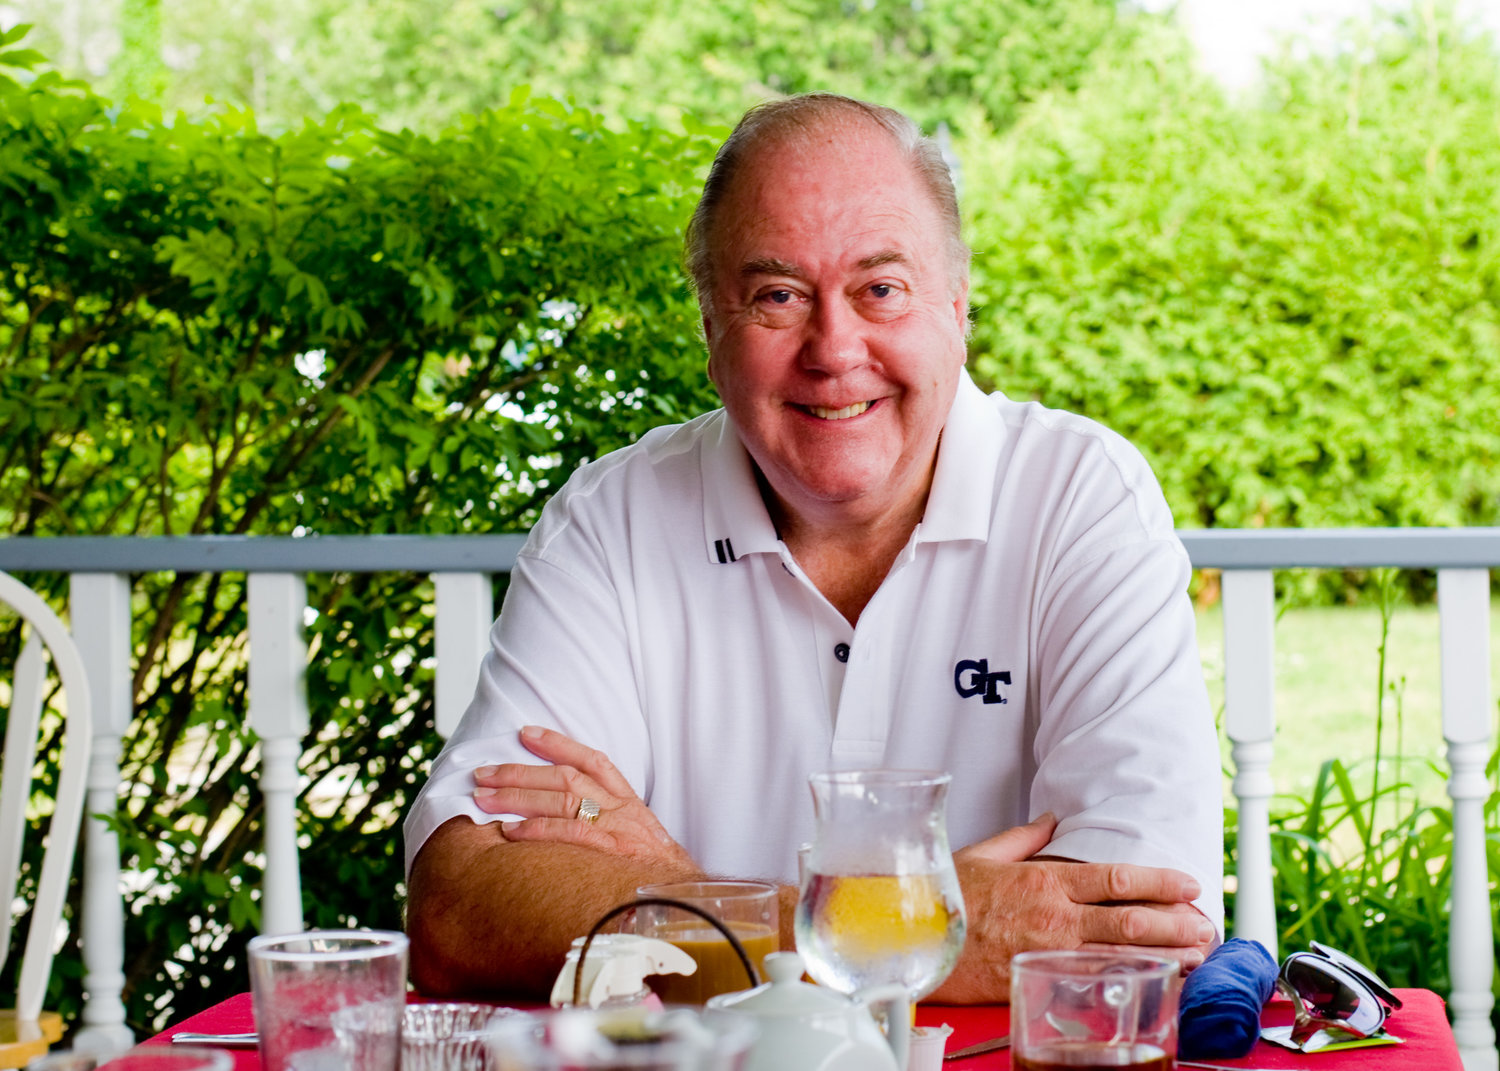 David Danzeisen, a business leader in Ponte Vedra Beach for many years, passed away May 11.